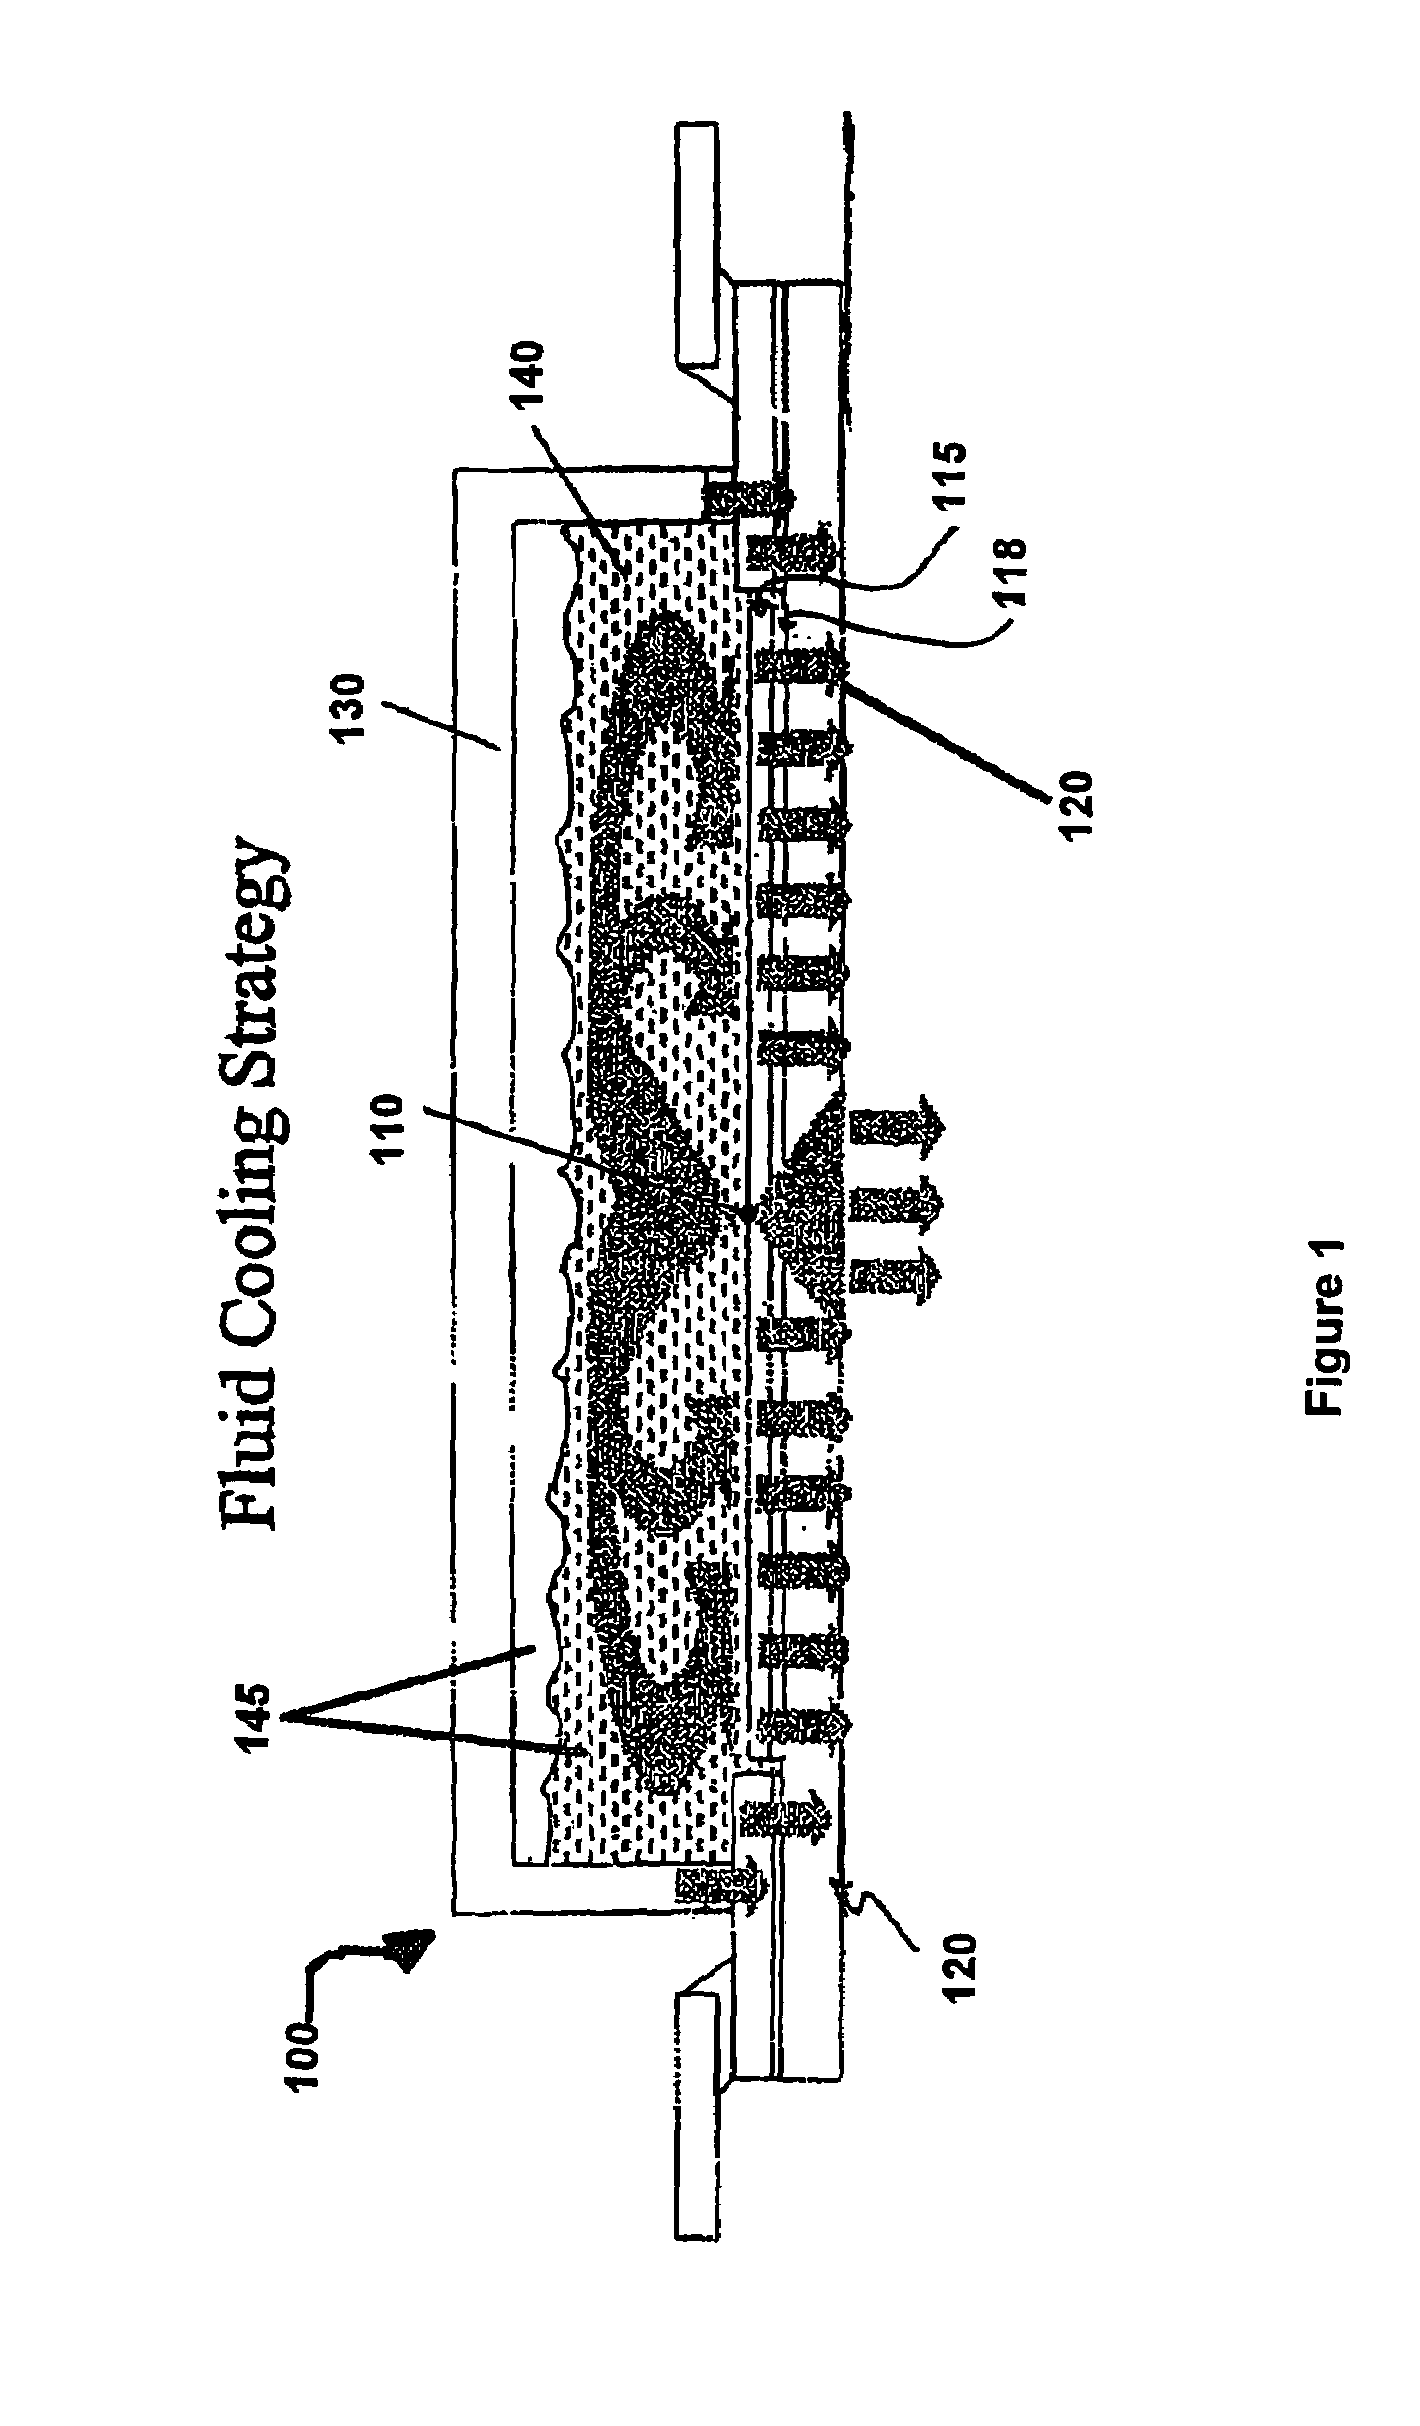 Direct contact semiconductor cooling